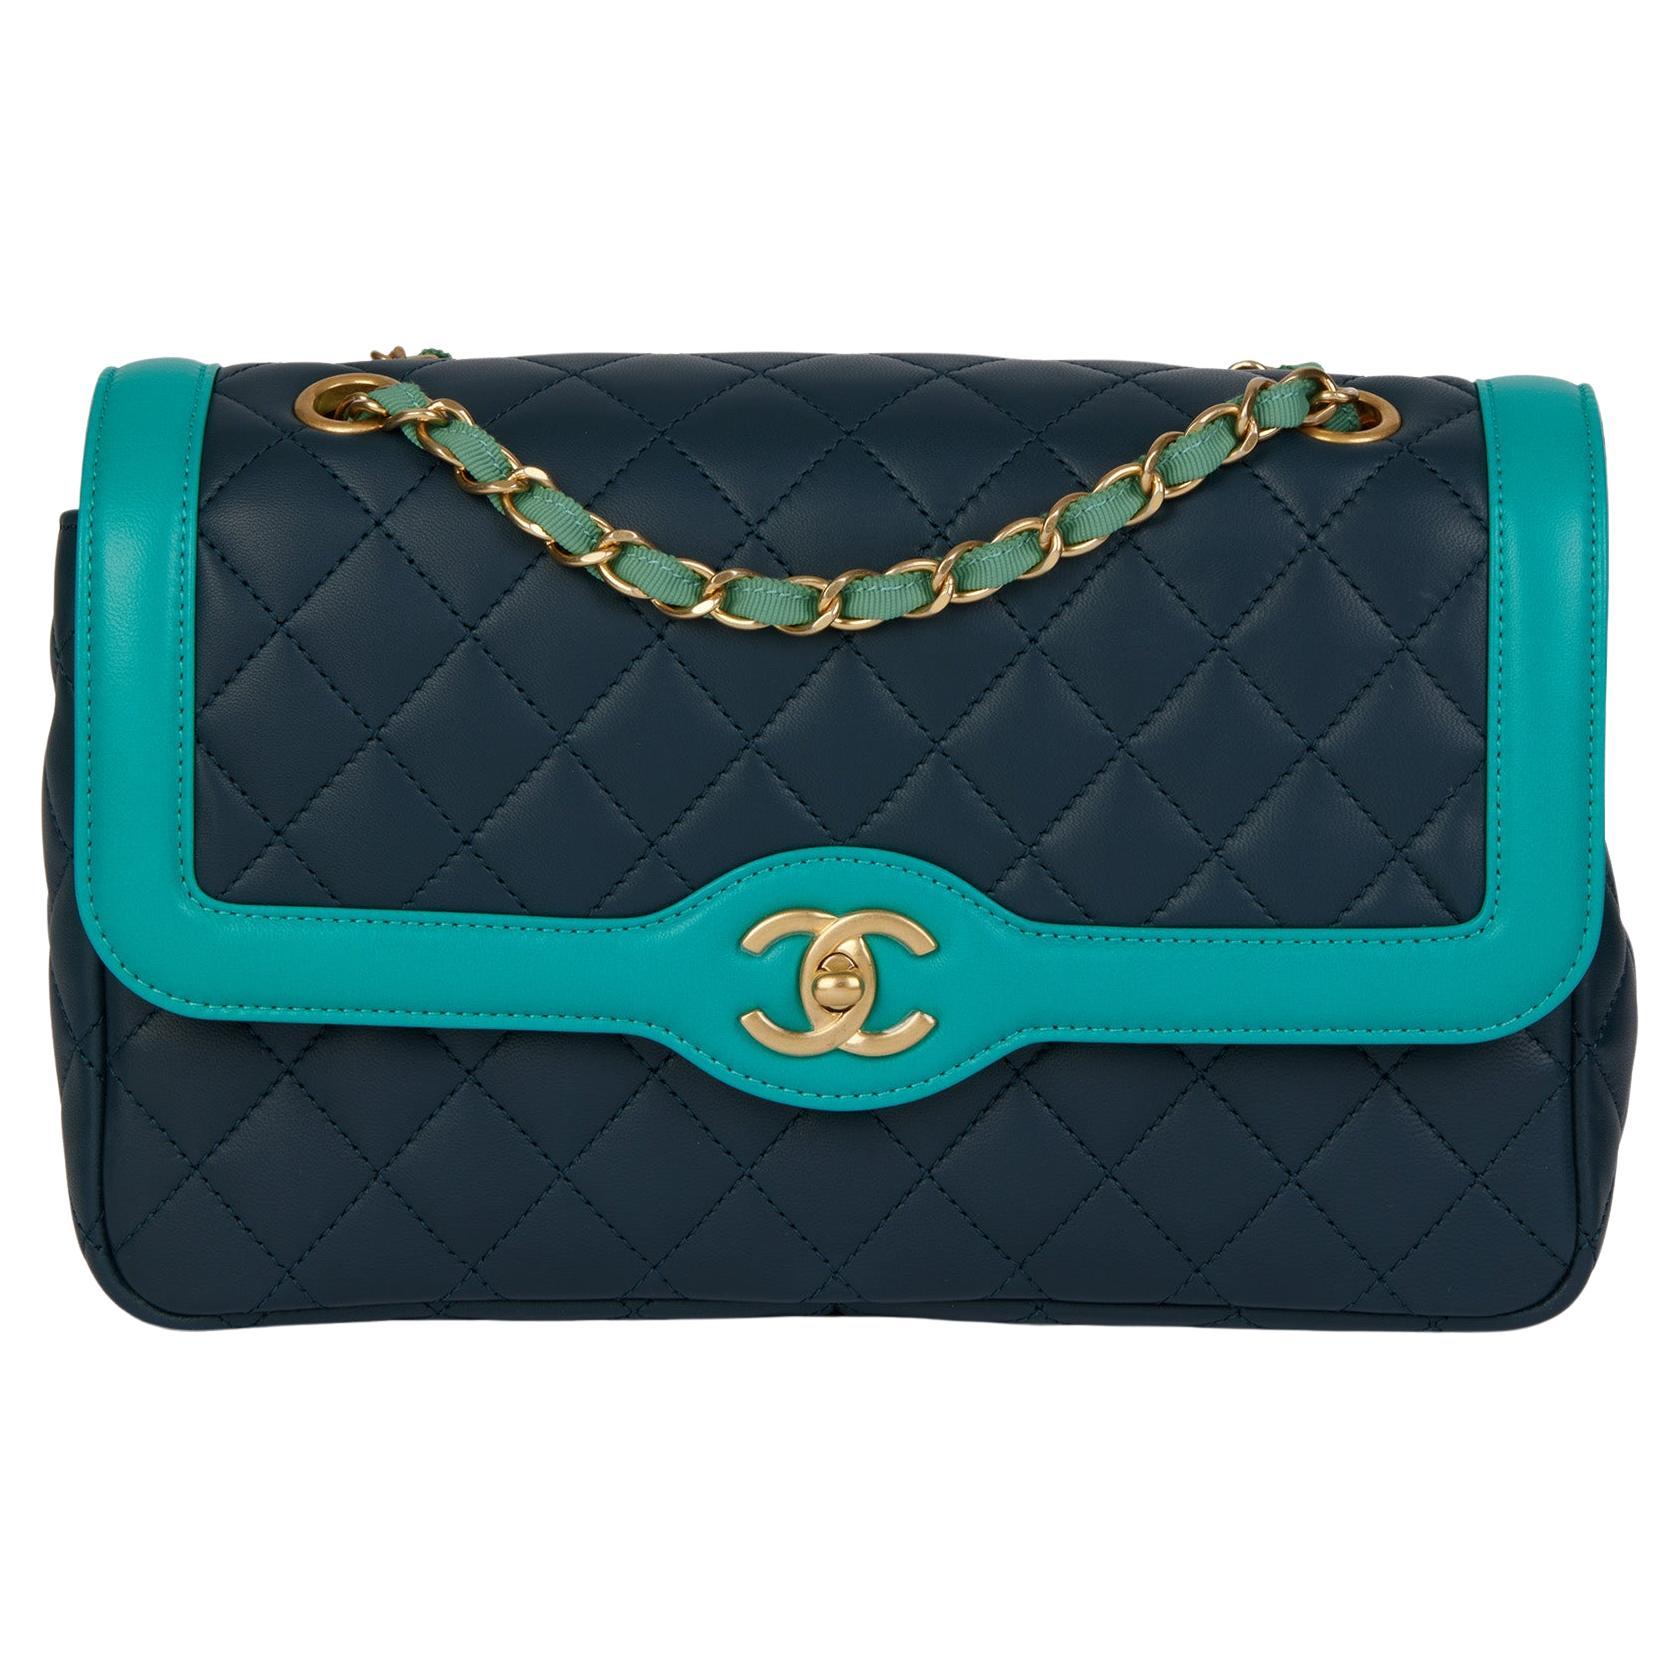 CHANEL Navy & Turquoise Quilted Lambskin Medium Classic Single Flap Bag